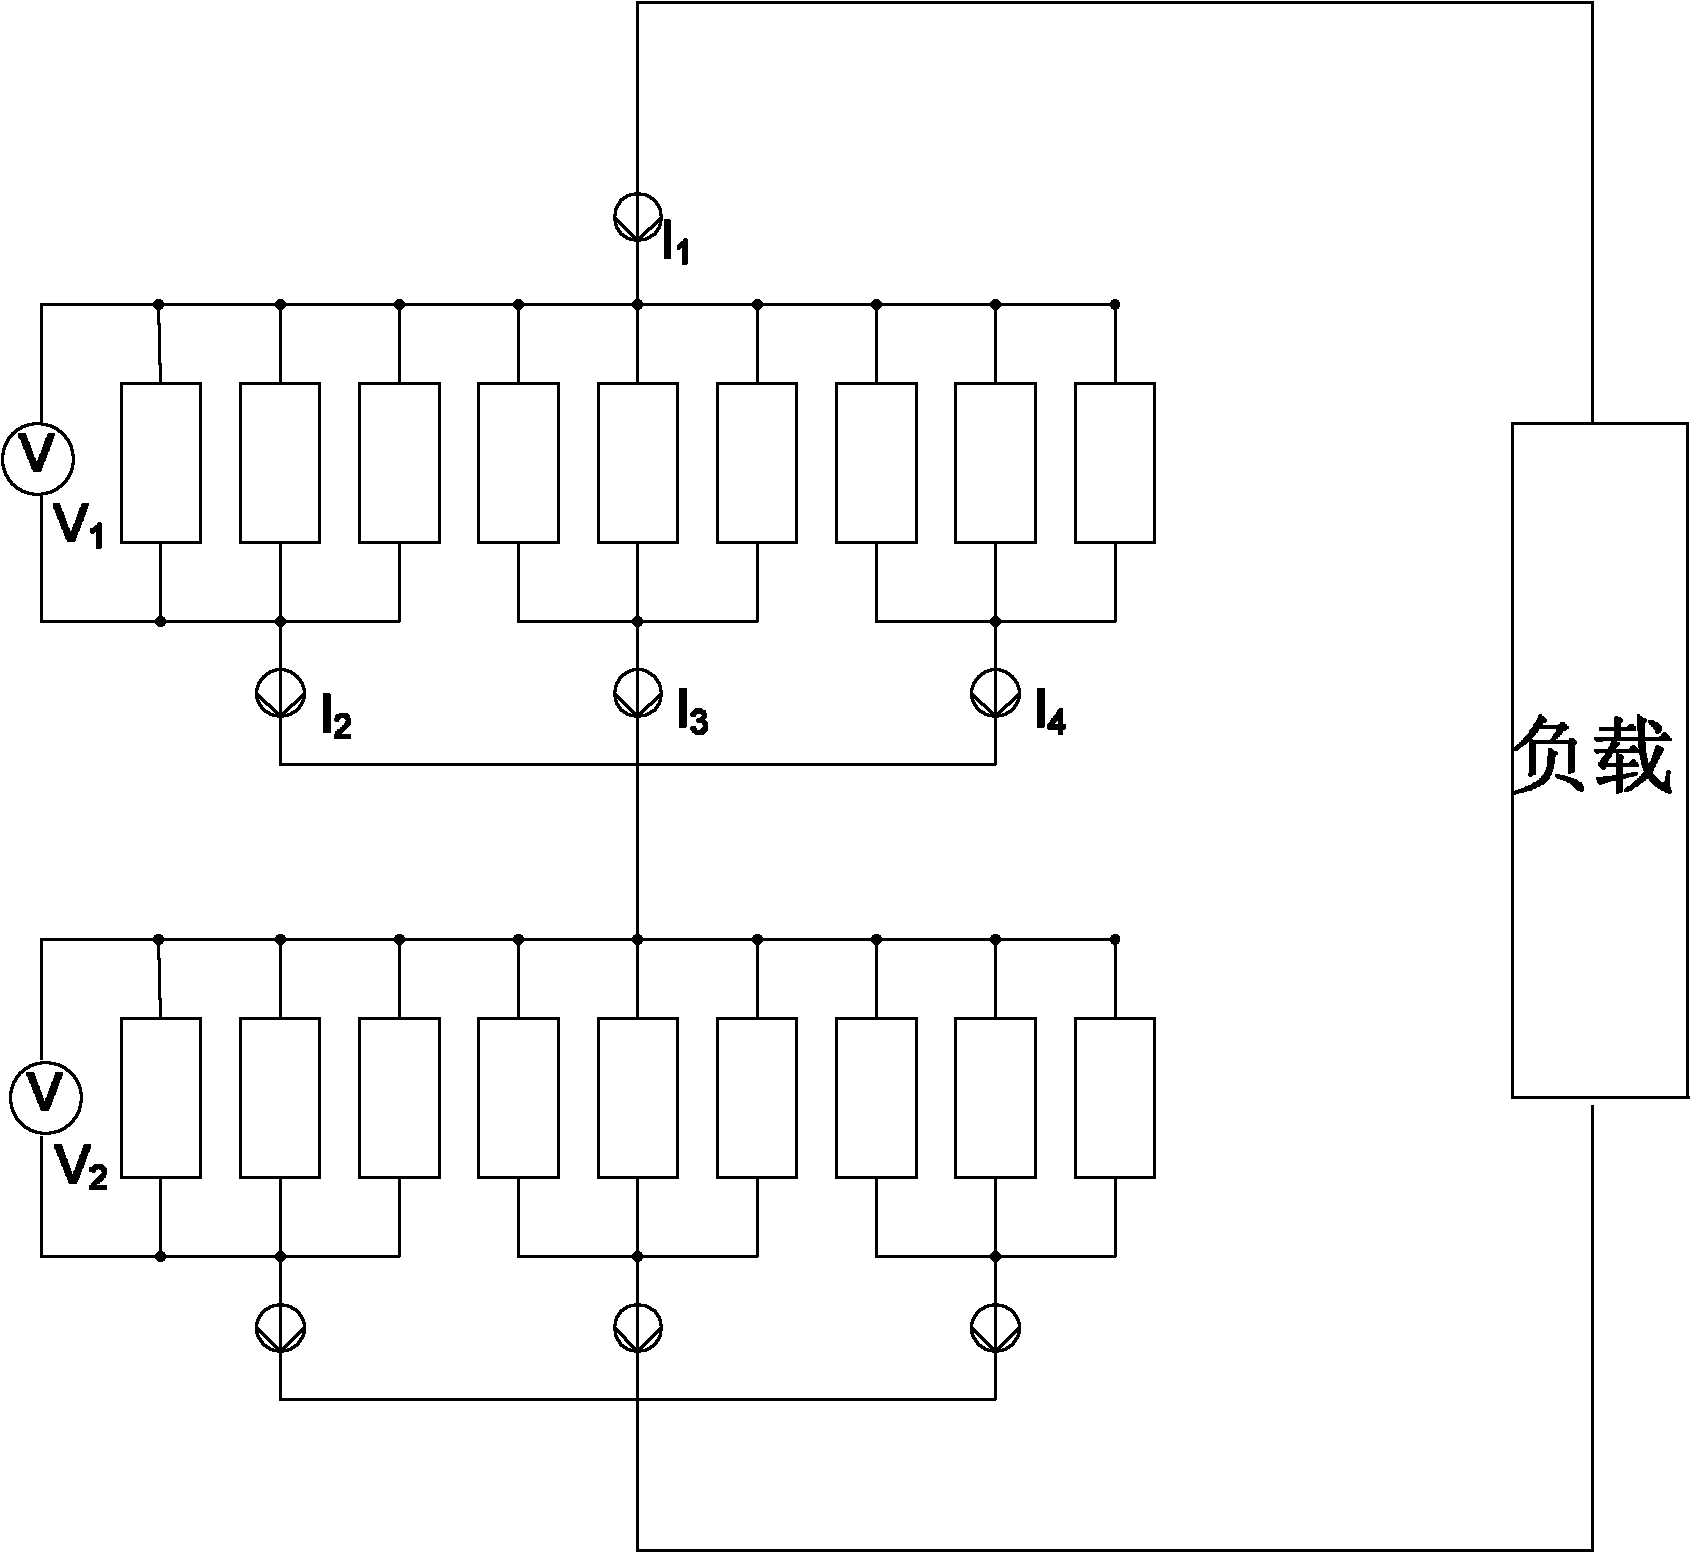 Fault diagnosis method of large-sized photovoltaic array